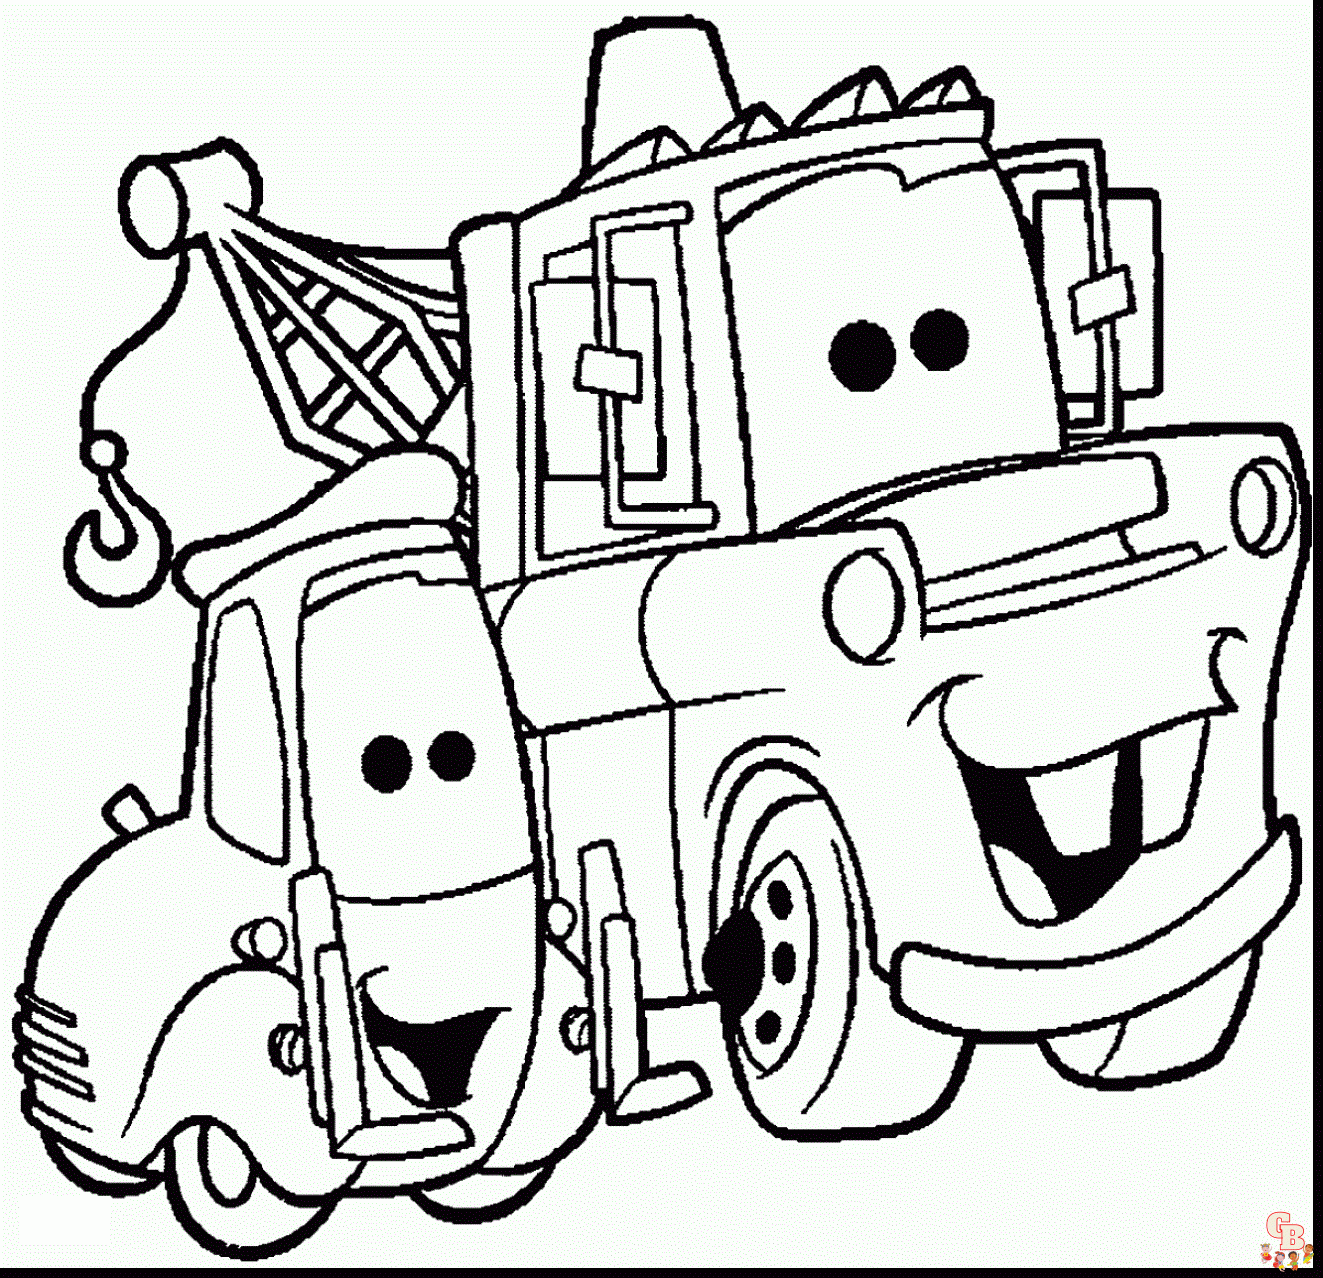 Cute Tow Mater coloring pages printable free